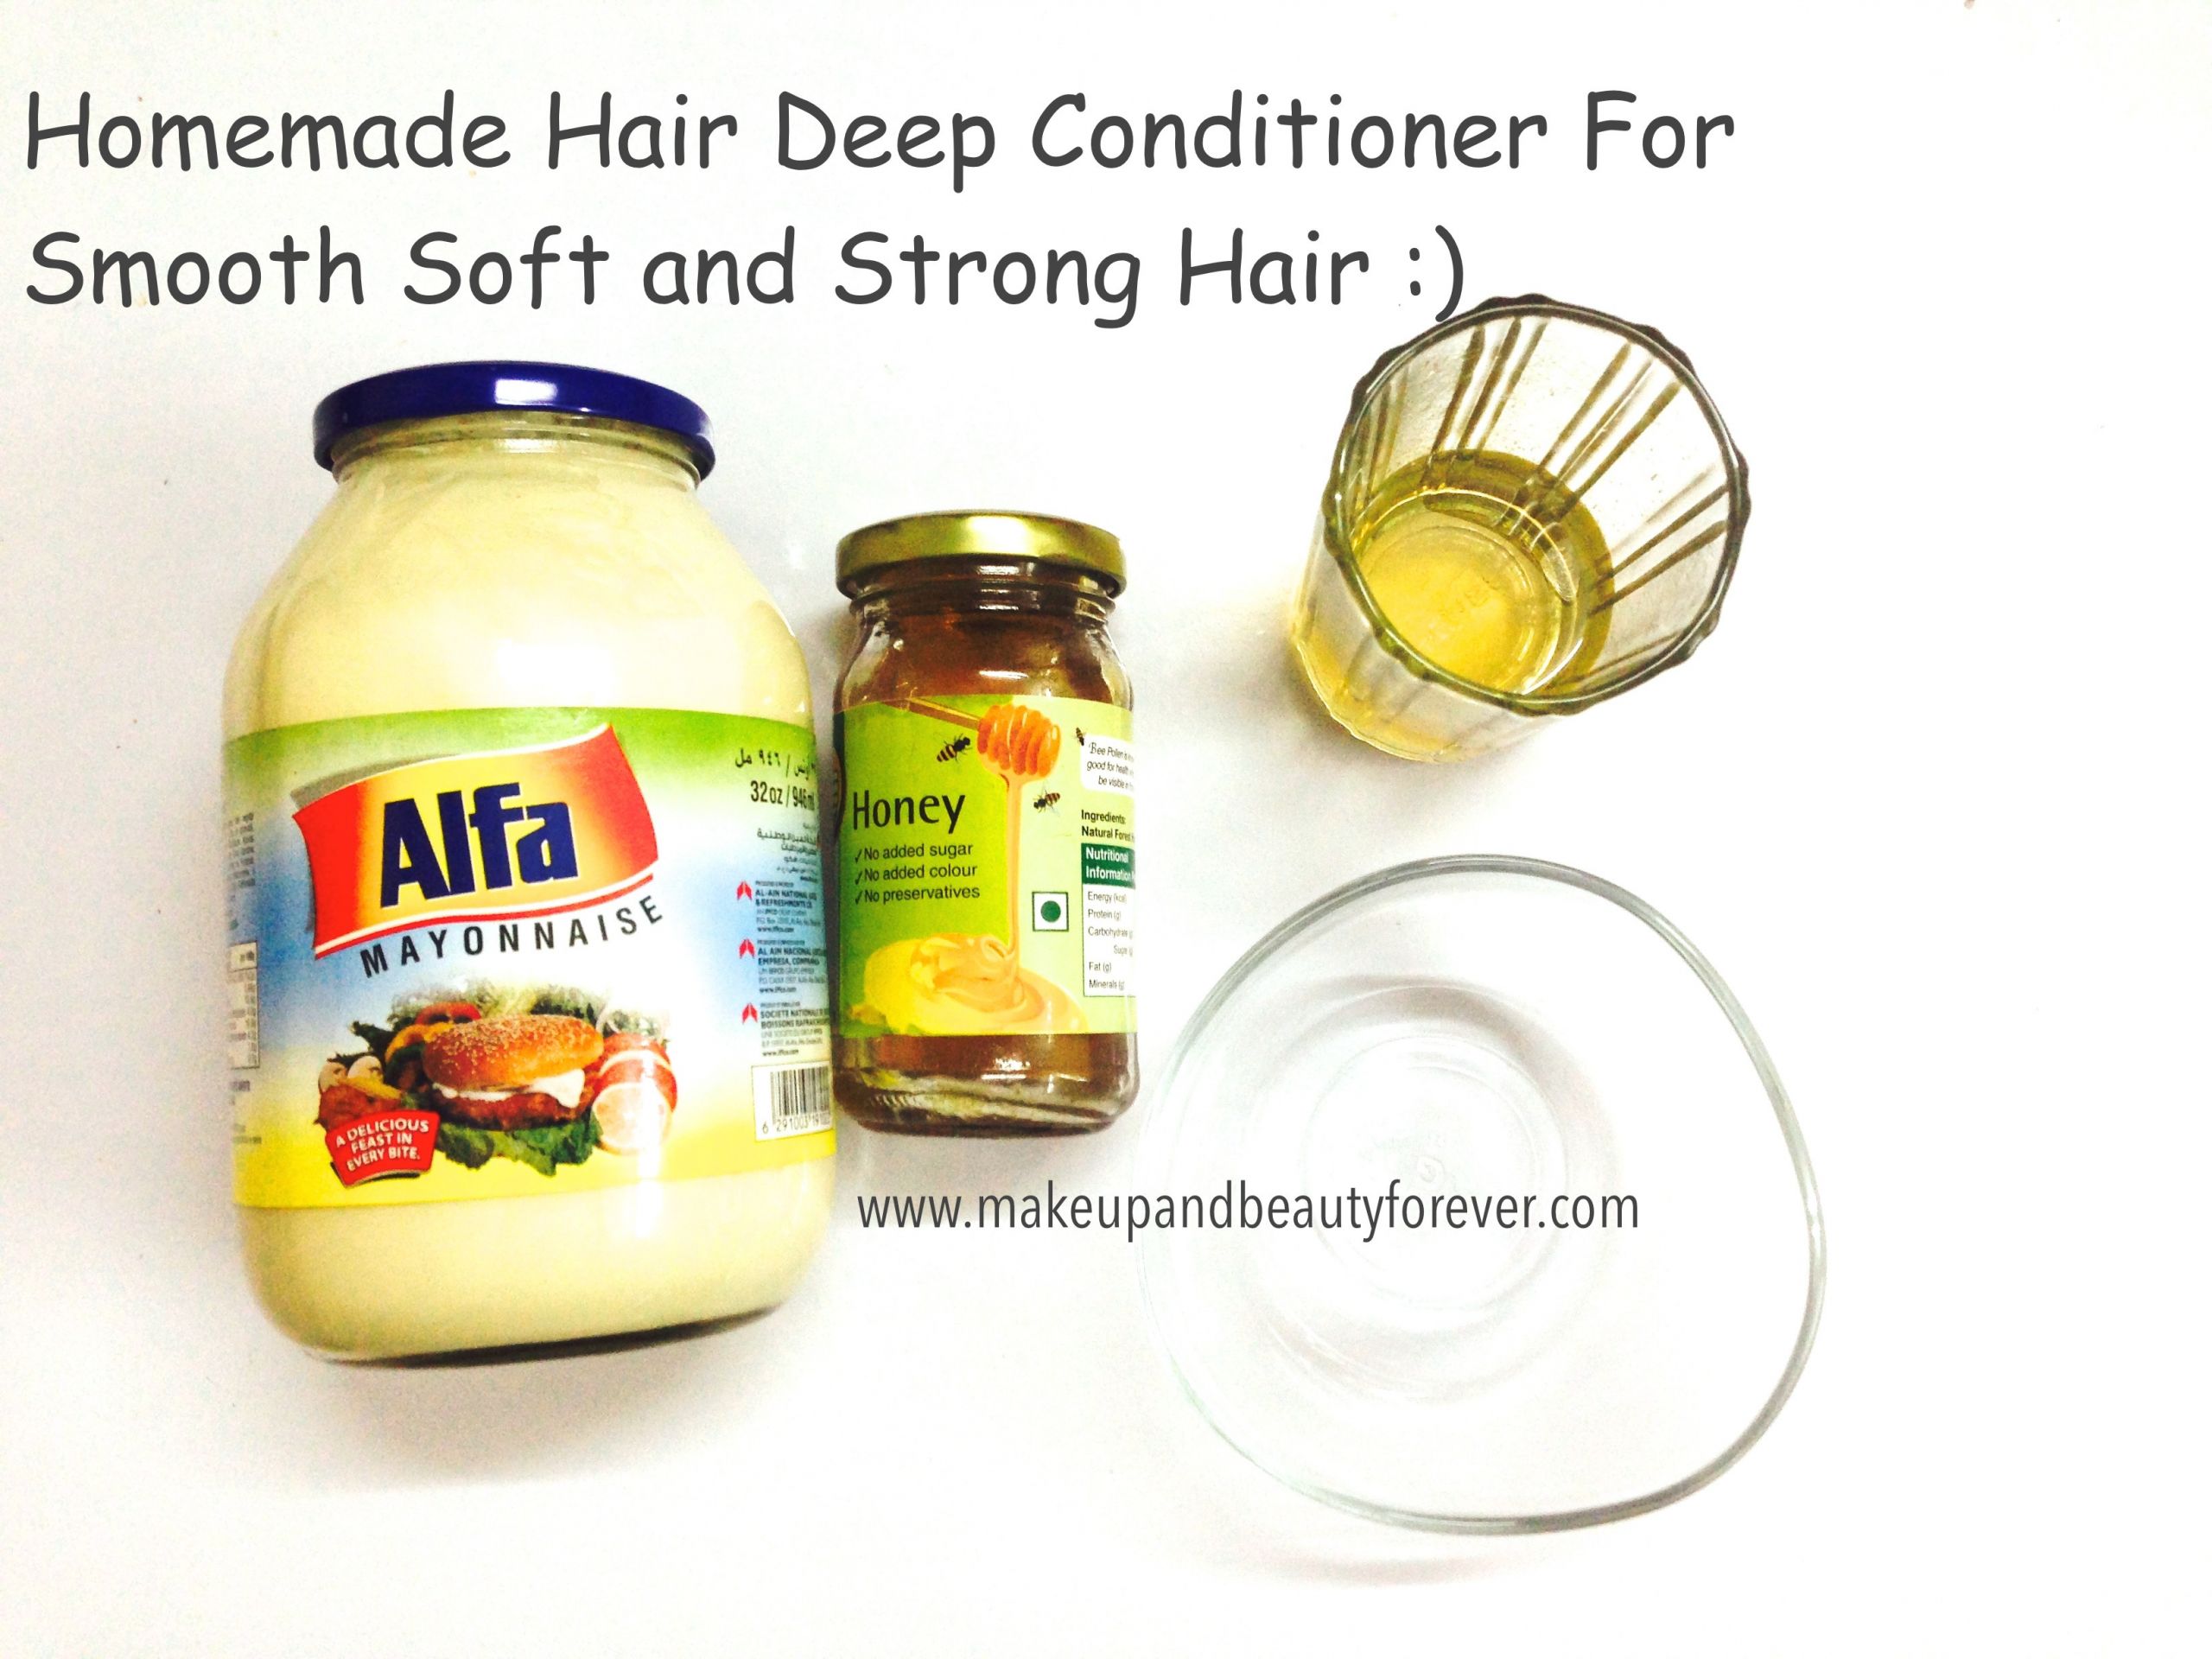 DIY Deep Hair Conditioner
 Do It Yourself Homemade Hair Deep Conditioner with Apple